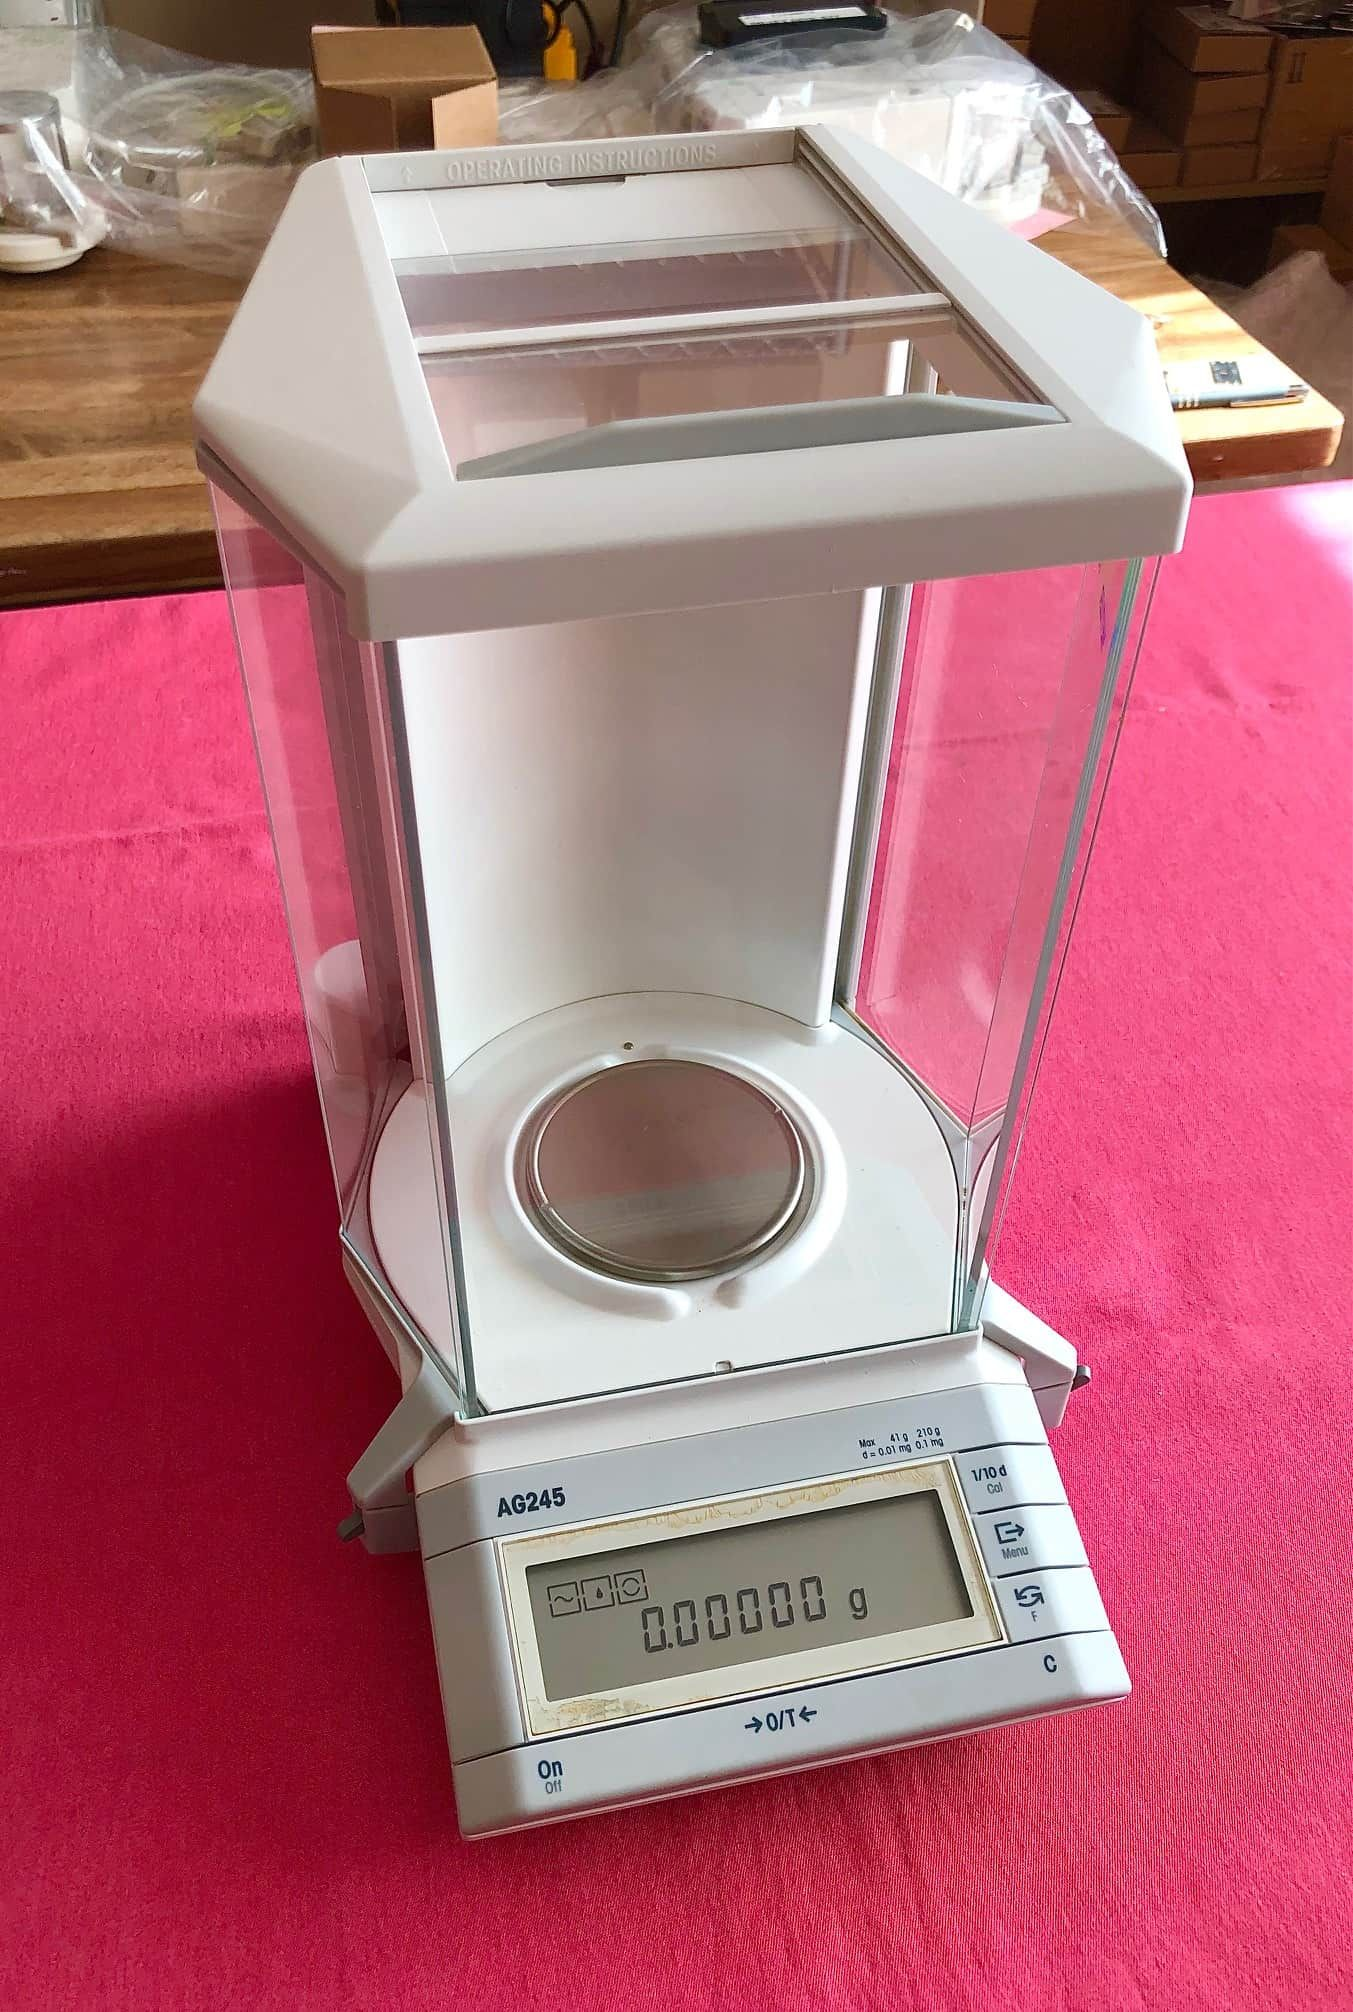 Mettler Toledo AG245 Analytical Balance Scale 41.00000g/210.0000g. This balance is not available for sale. 